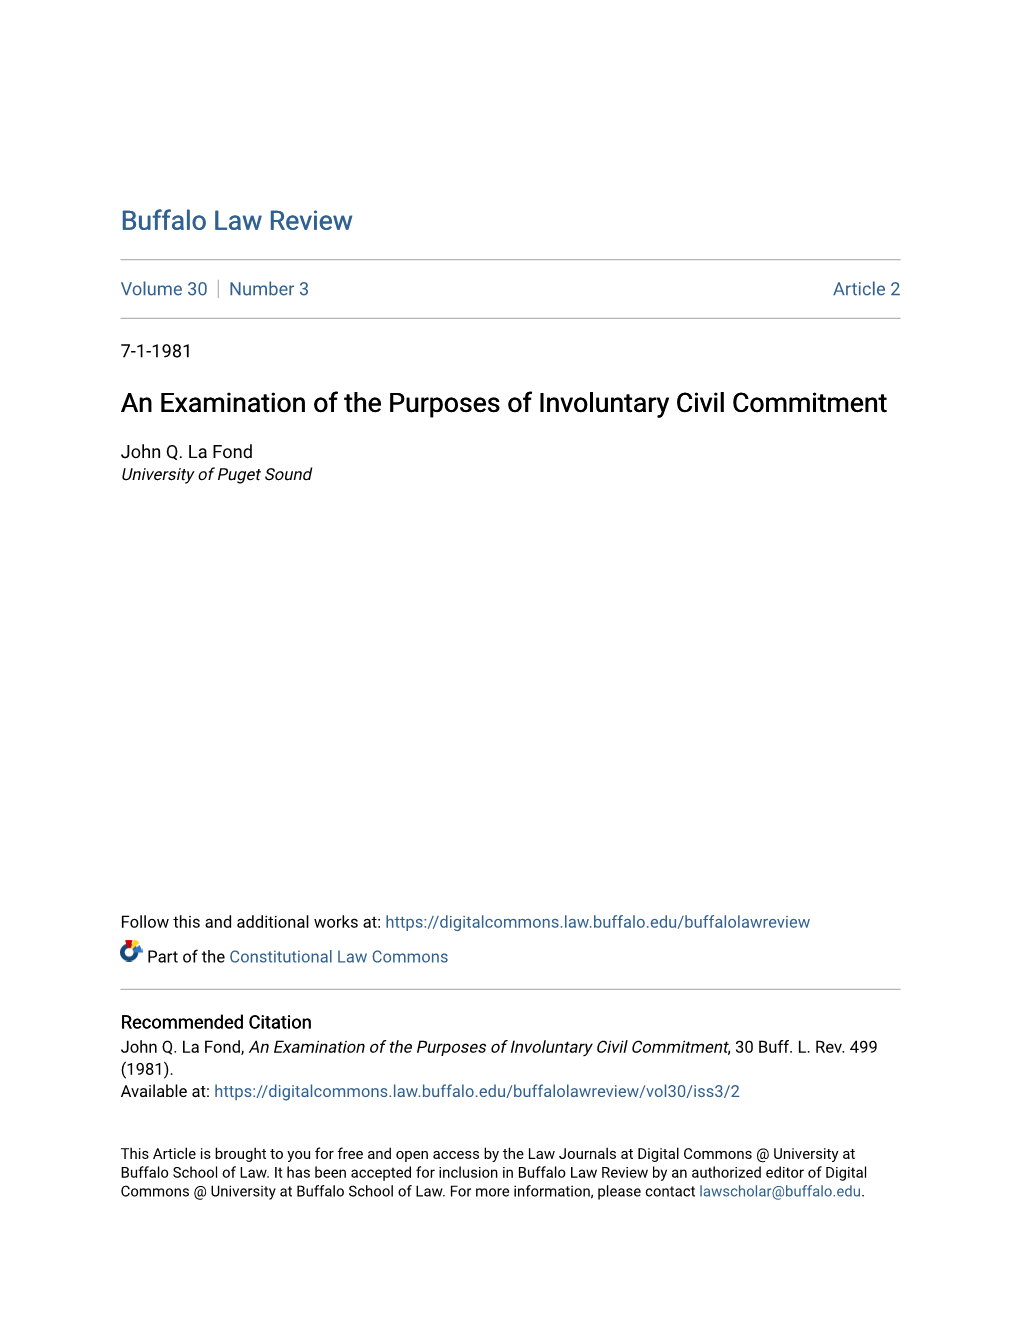 An Examination of the Purposes of Involuntary Civil Commitment